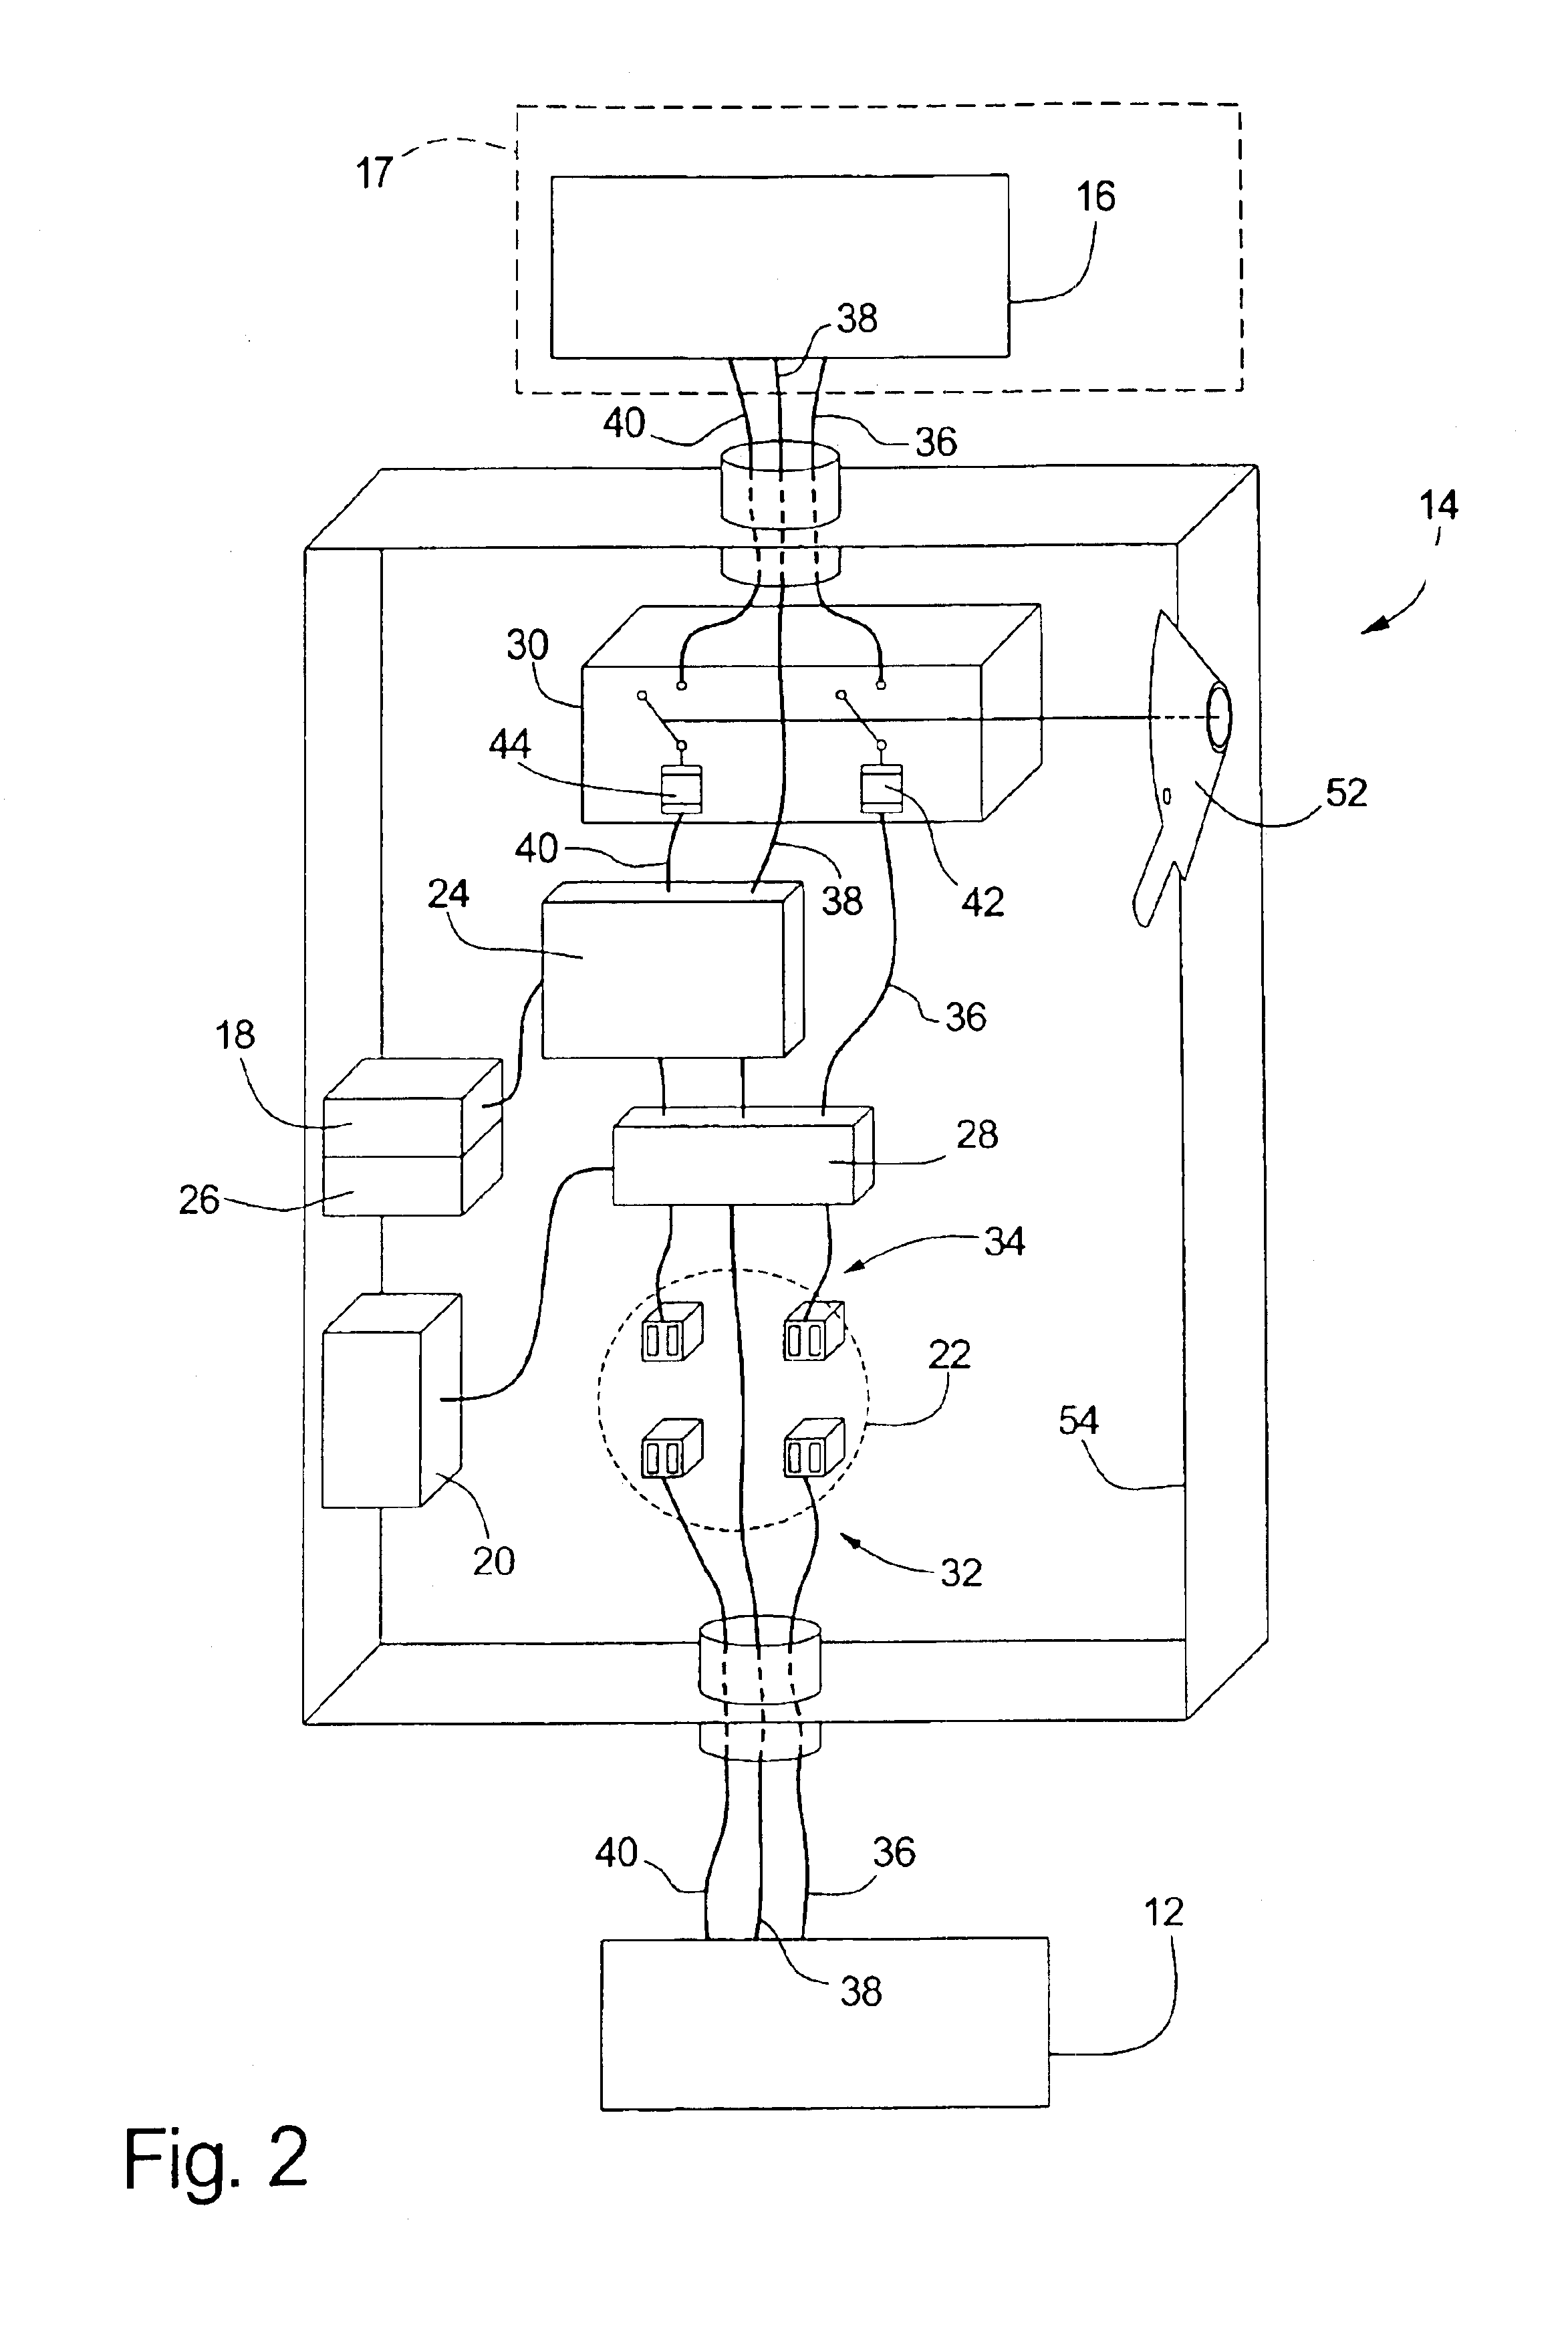 Device and method for providing electric service